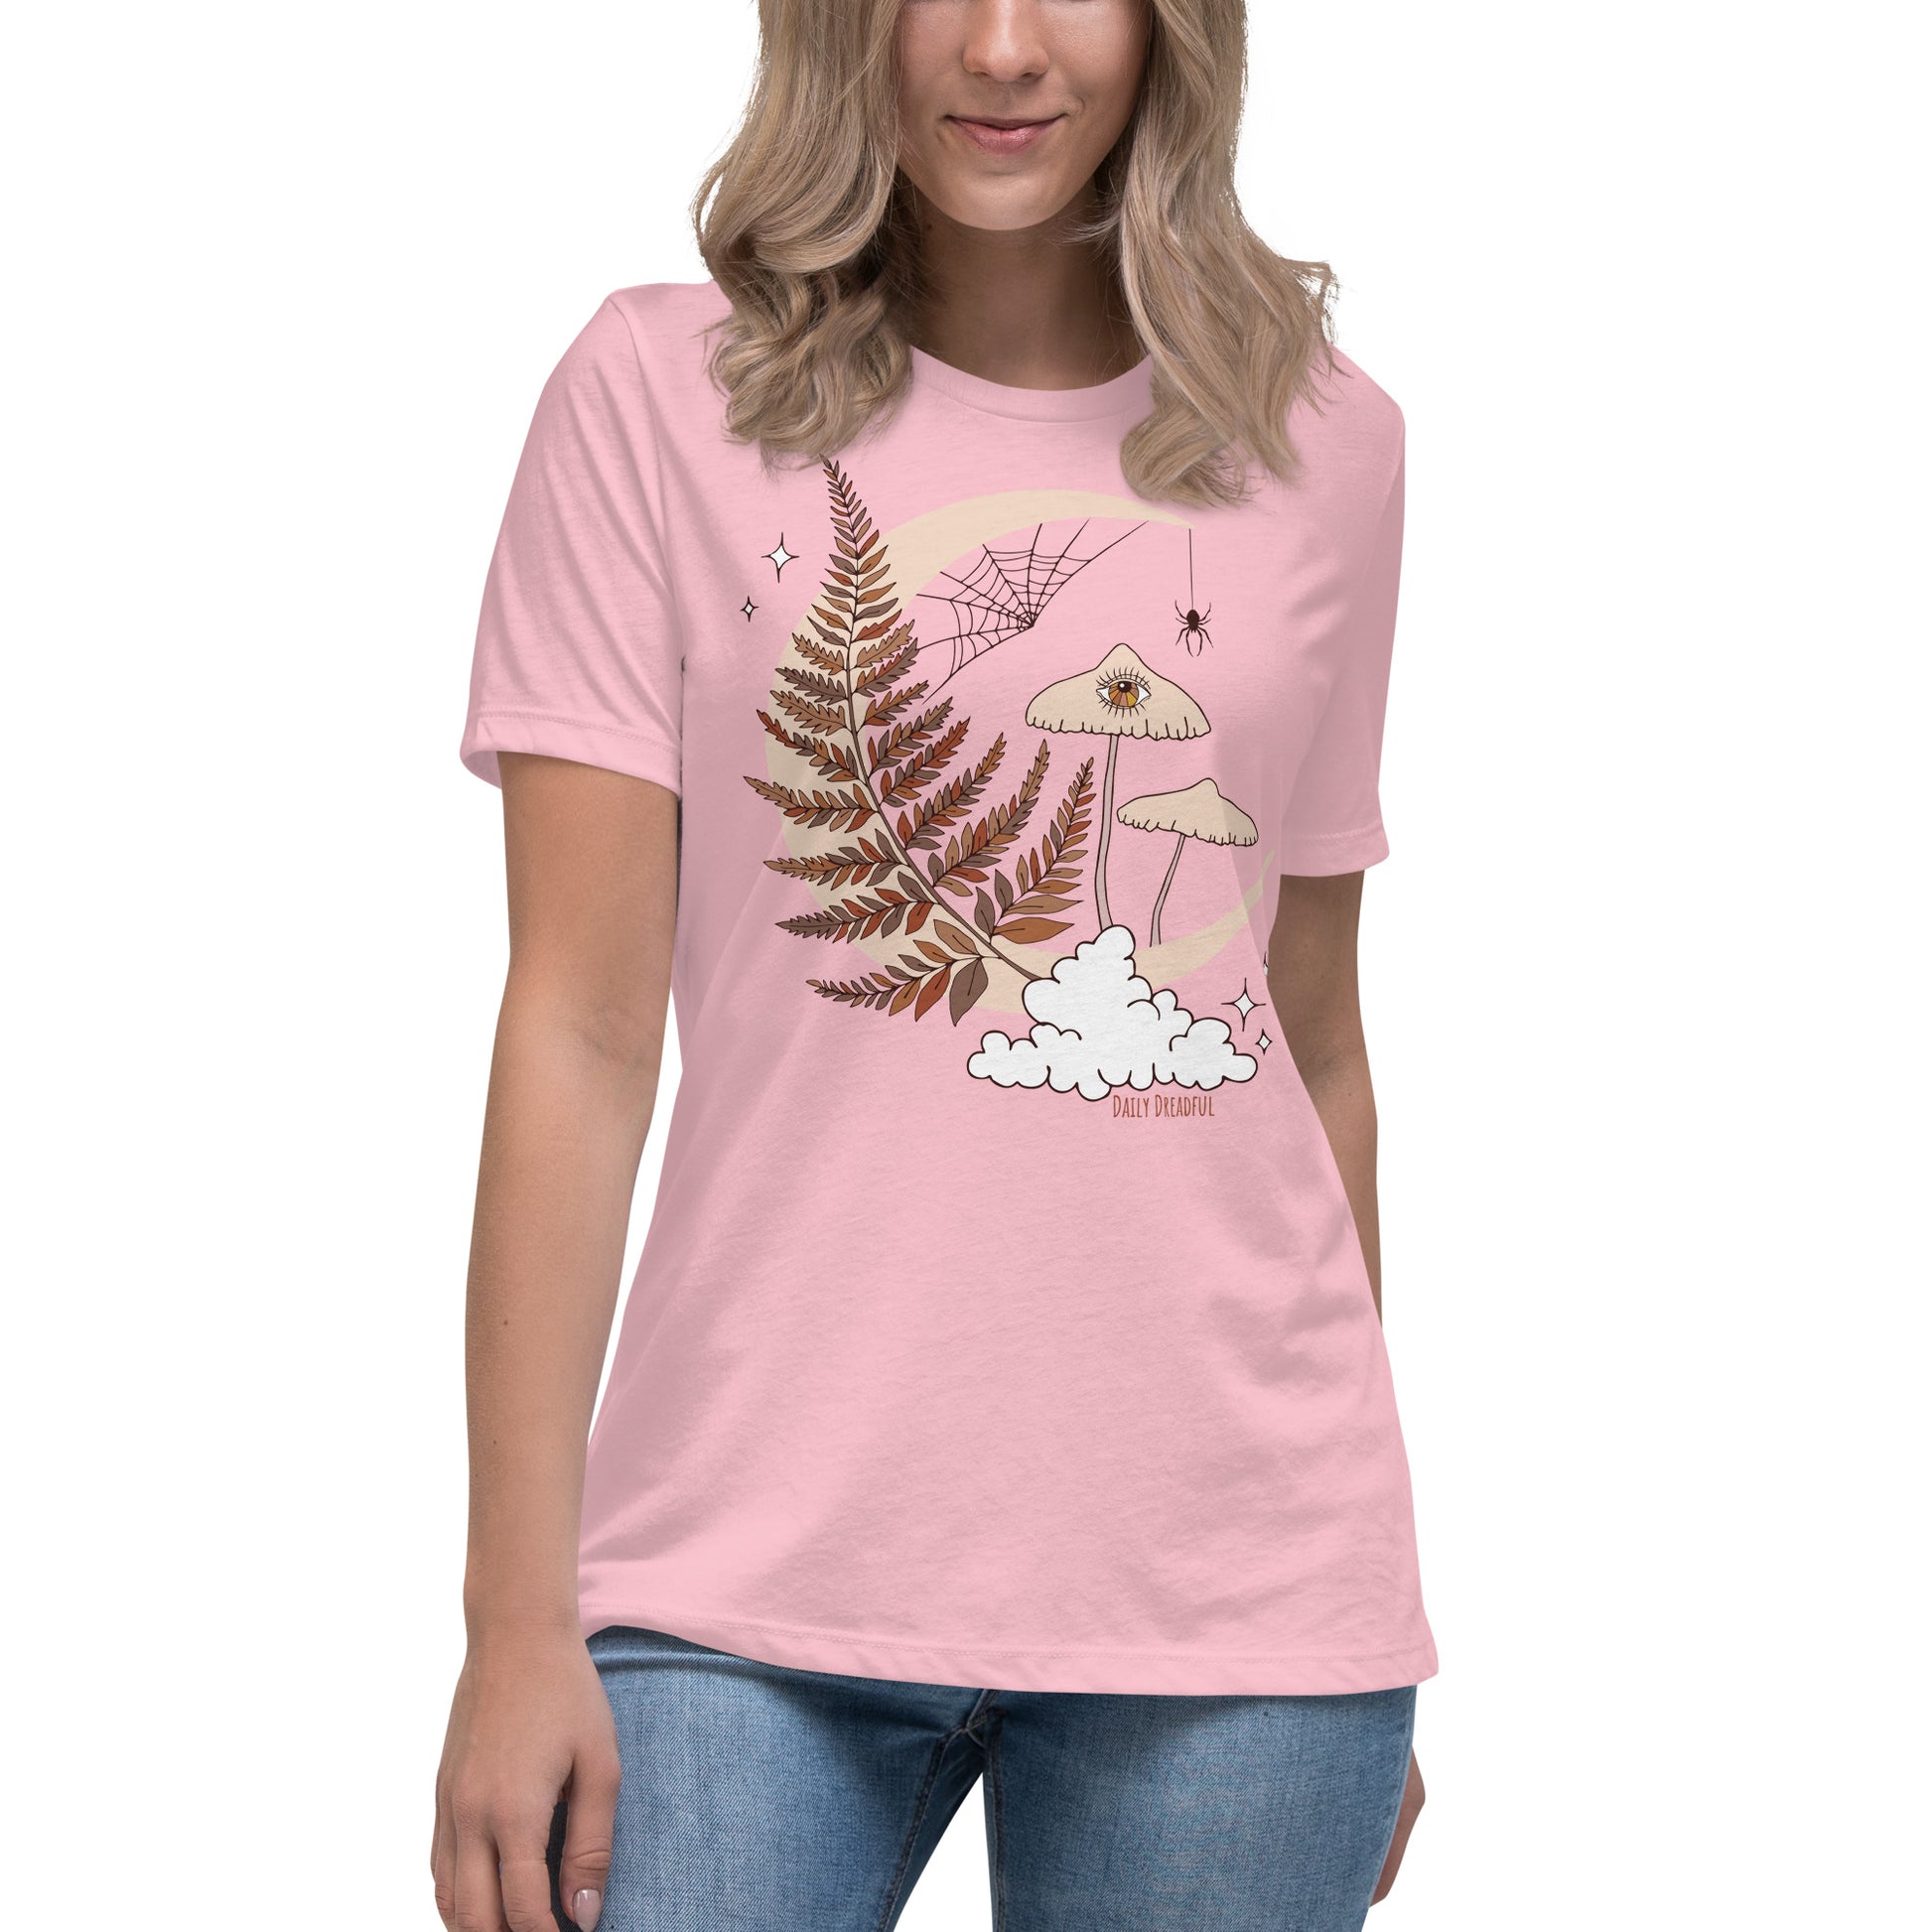 "Magic Mushroom" relaxed t-shirt, pink colored tee